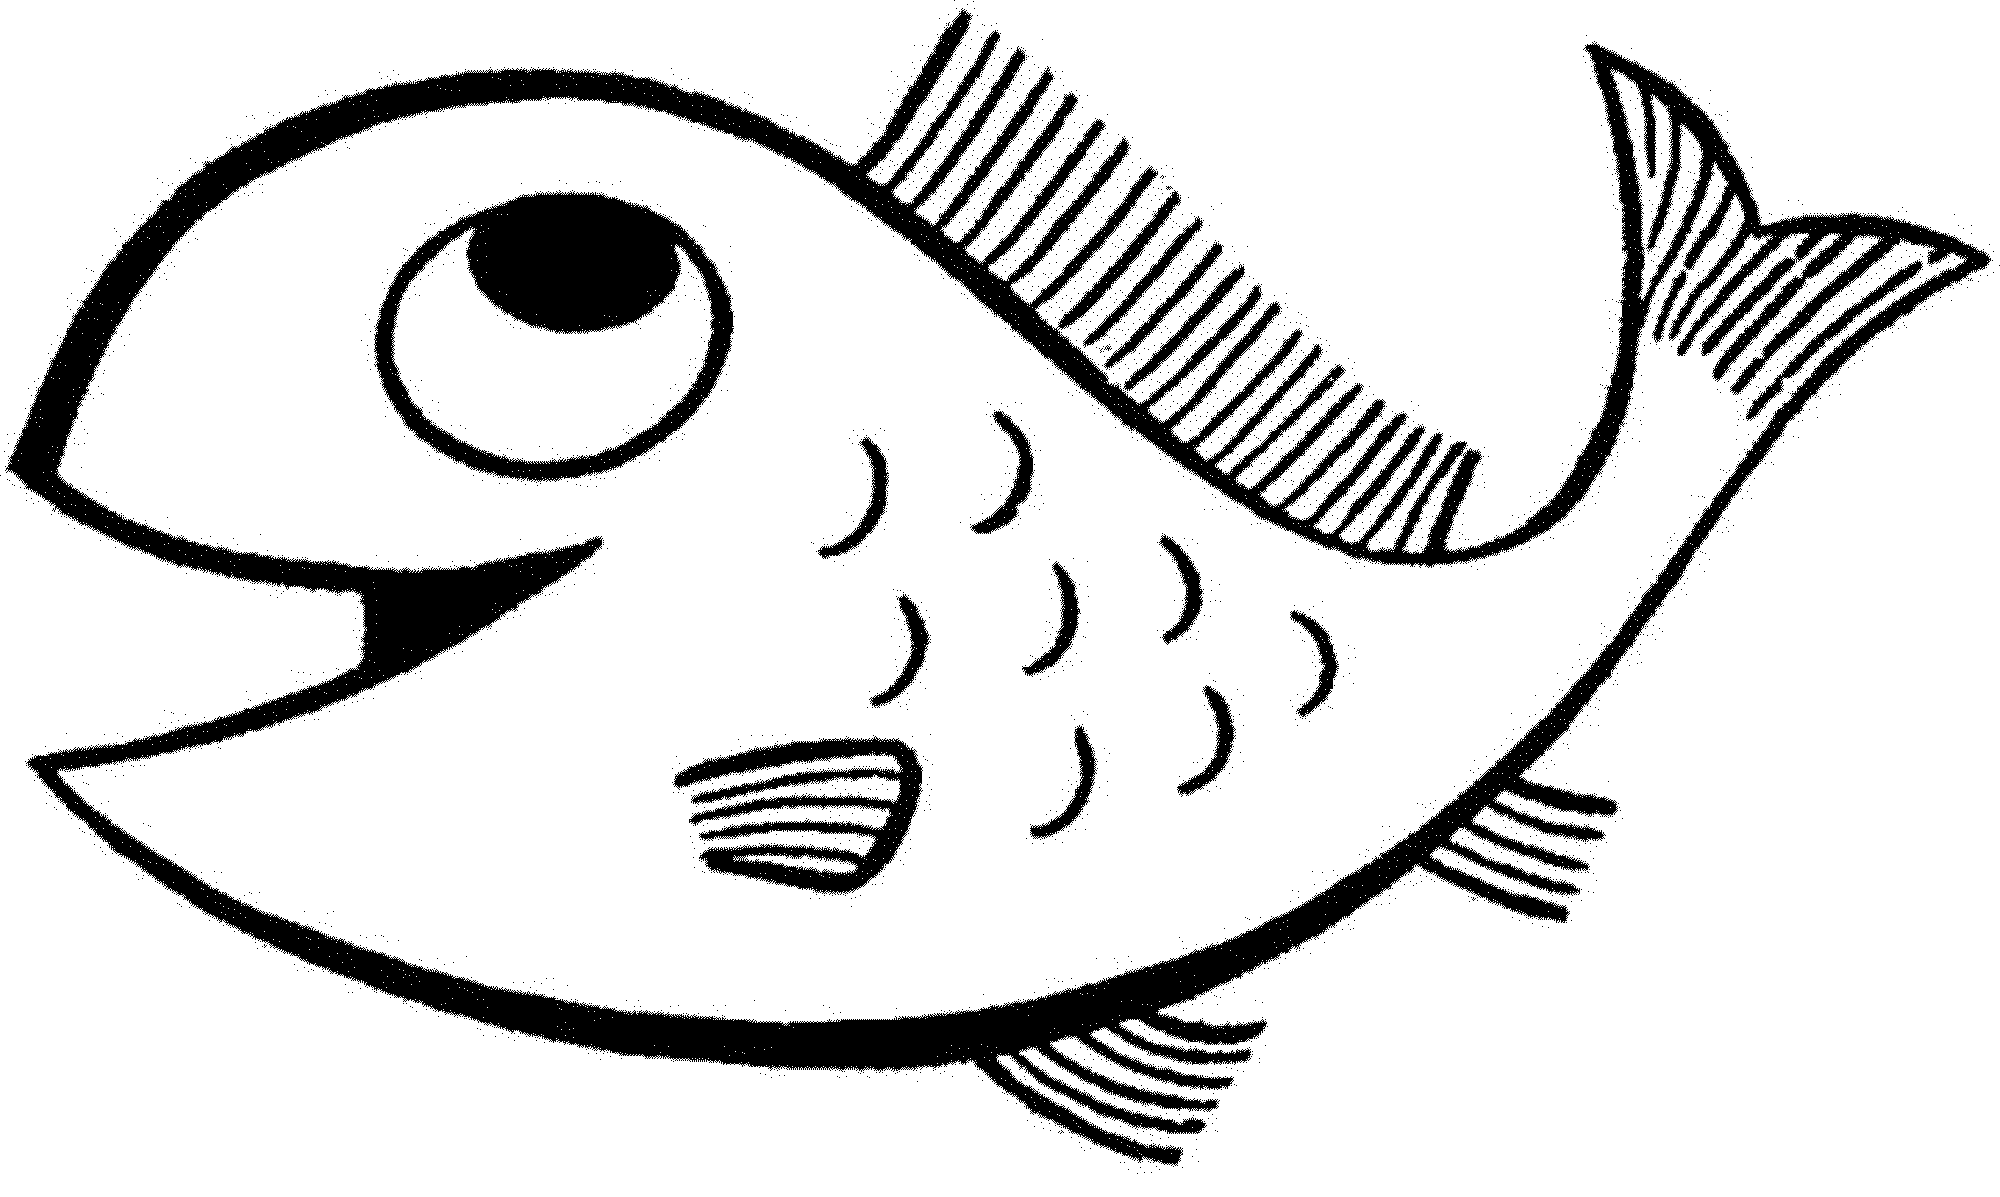 Print Download Cute and Educative Fish Coloring Pages